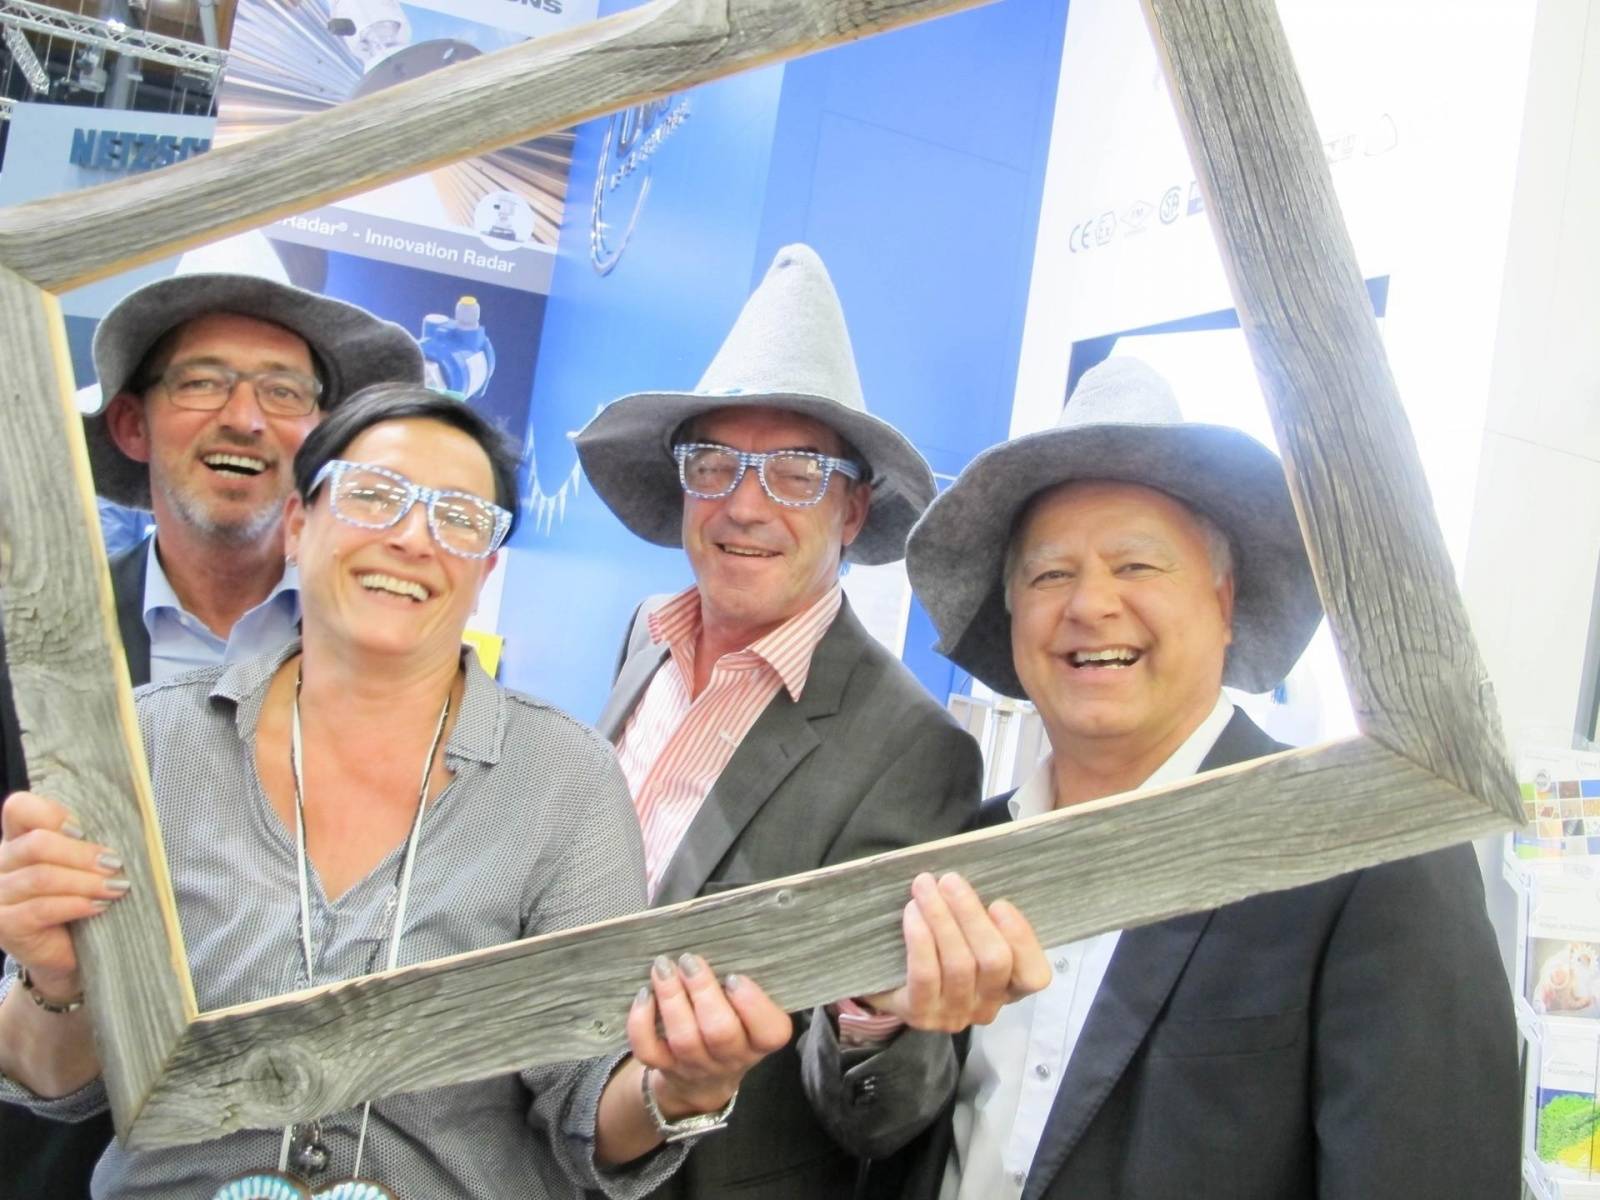 Guests from UWT with bavarian Hats